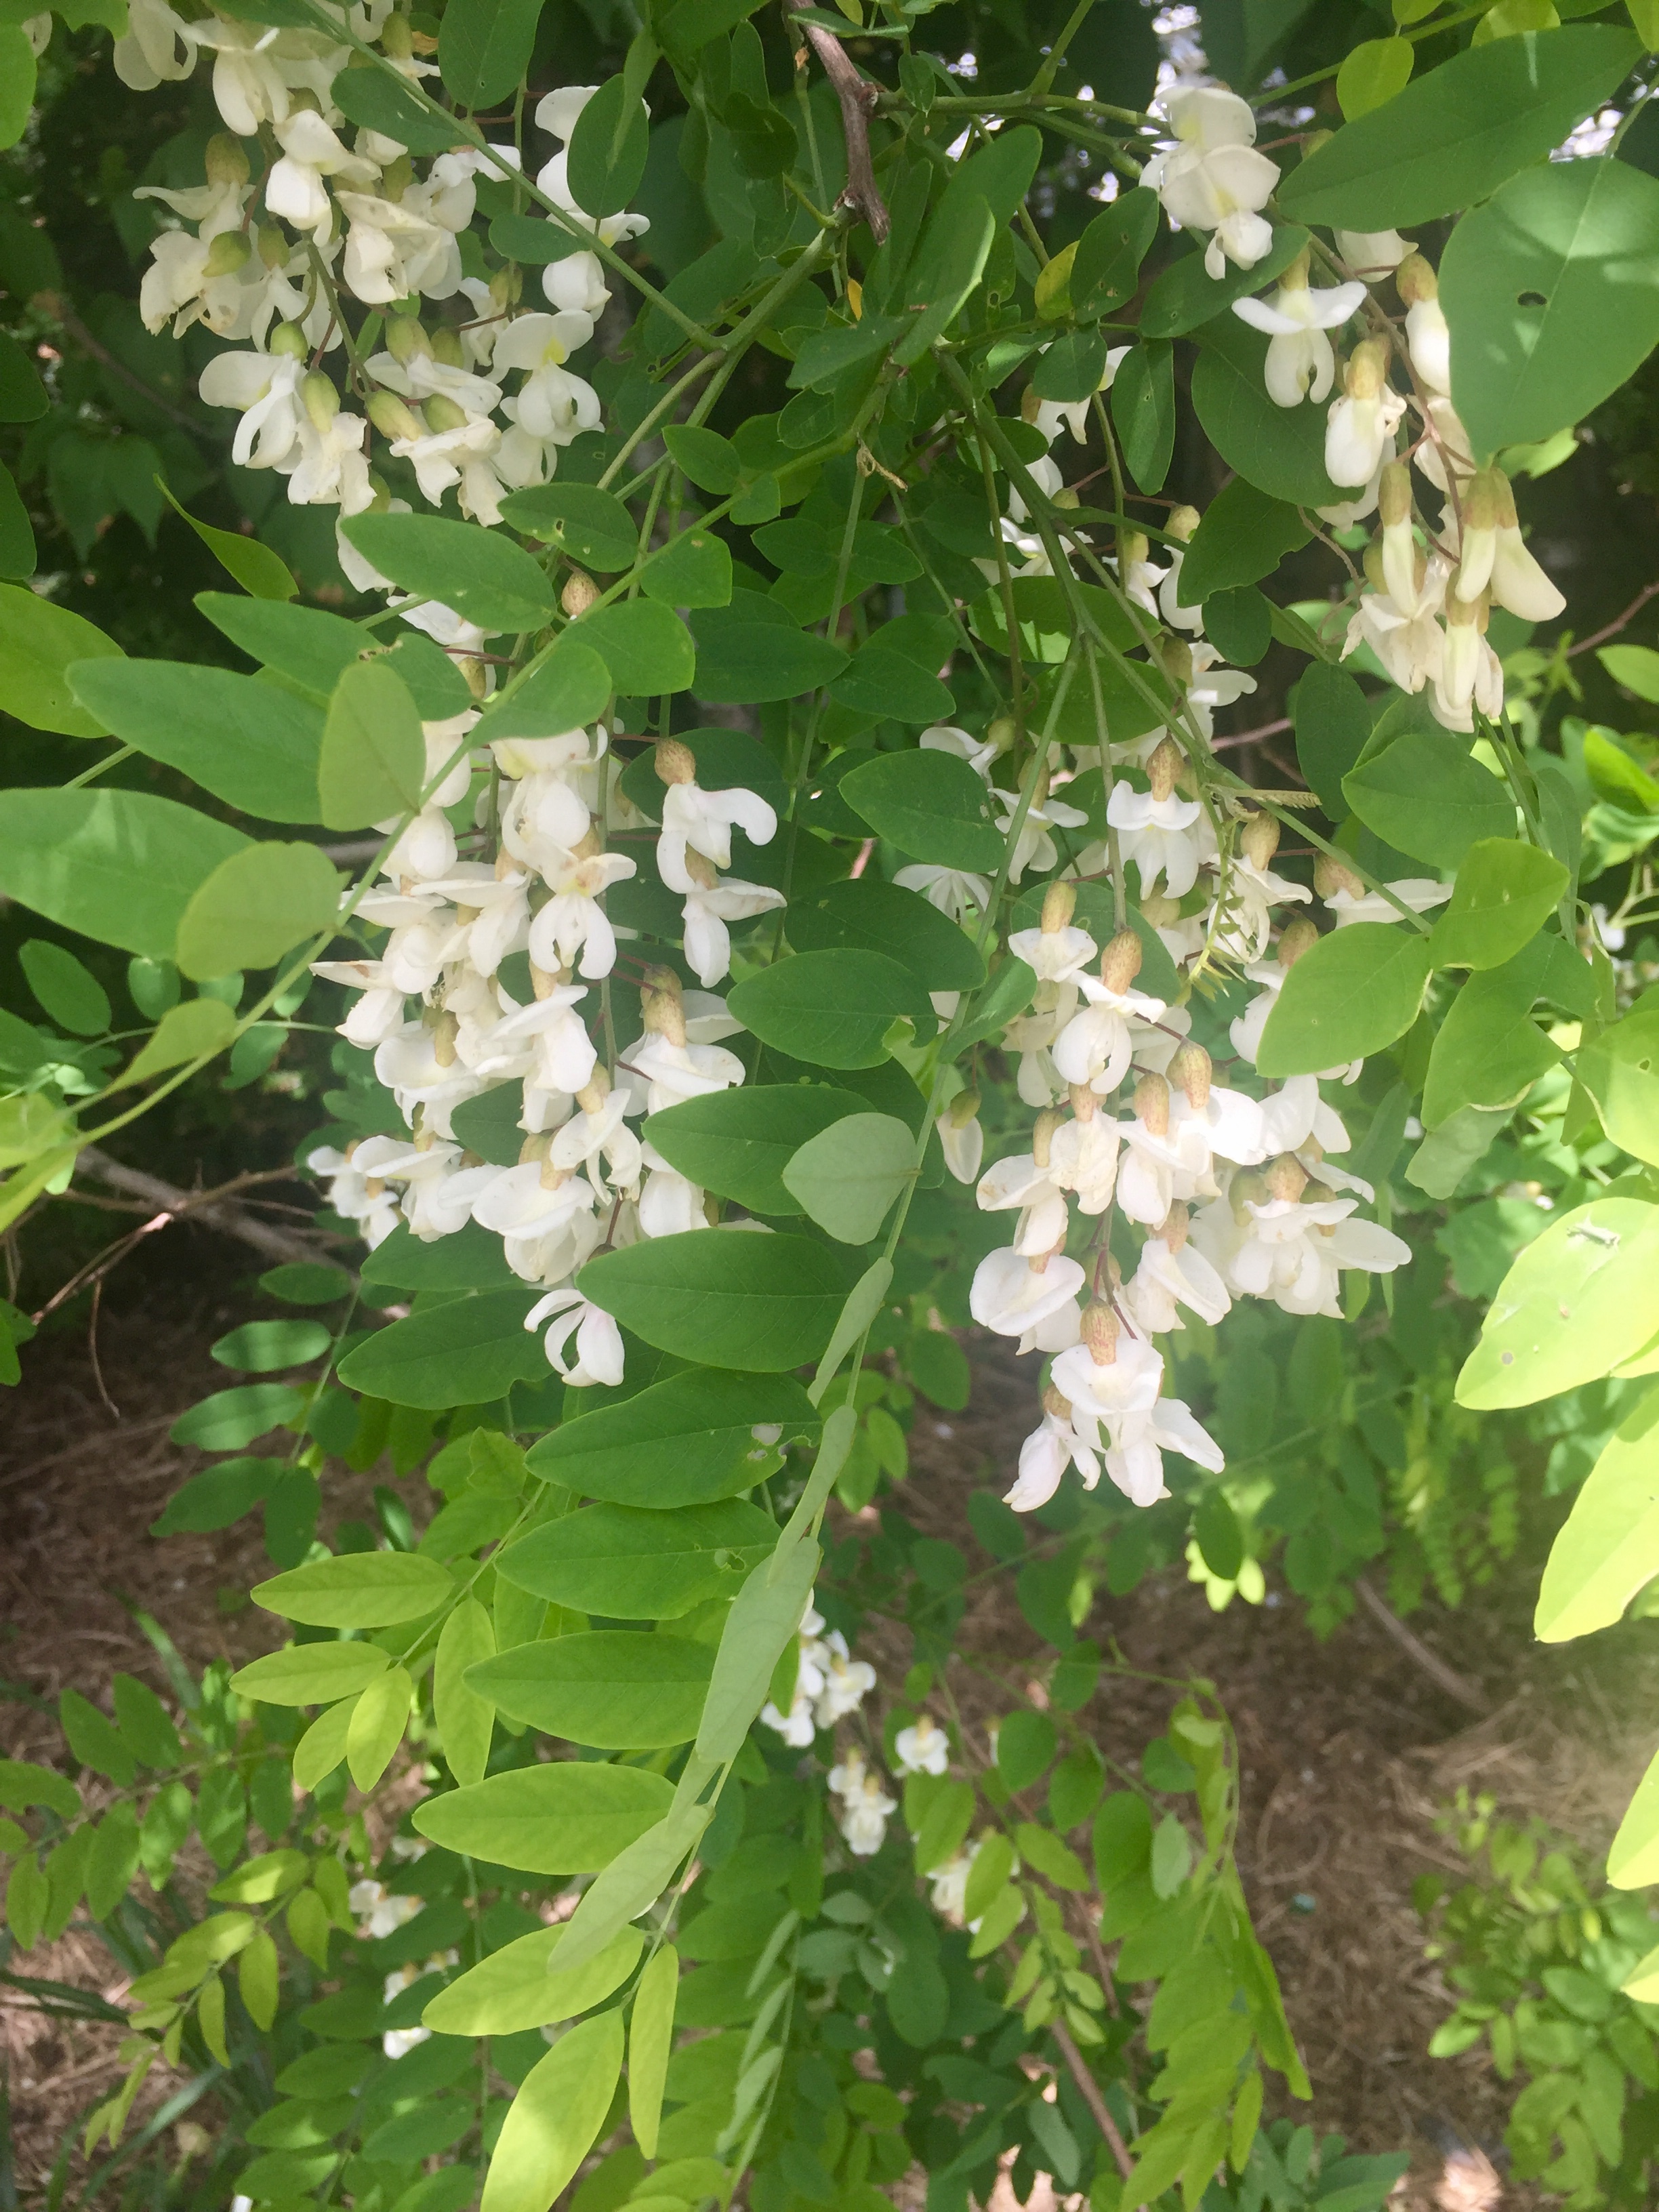  Black locust blossoms swaying in the breeze! 